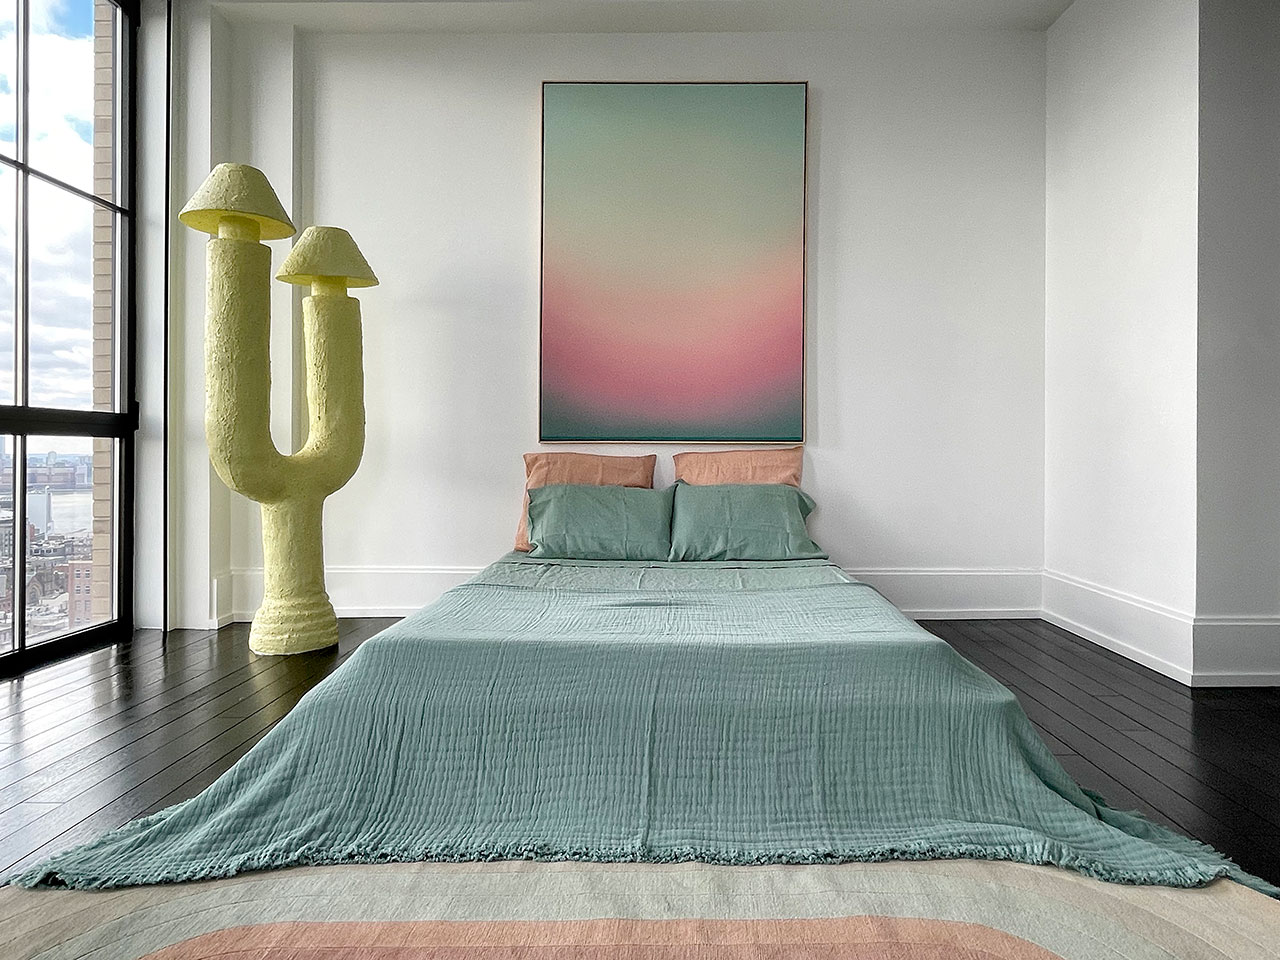 Galerie Philia at Walker Tower, Chelsea, New York. Courtesy of Galerie Philia.
Featured: 
Léa Mestres, Sculptural Floor Lamp.
Théo Pinto, Late Summer Twilight, 2020. Oil and resin on panel. 165 x 124.5 x 6.4 cm.